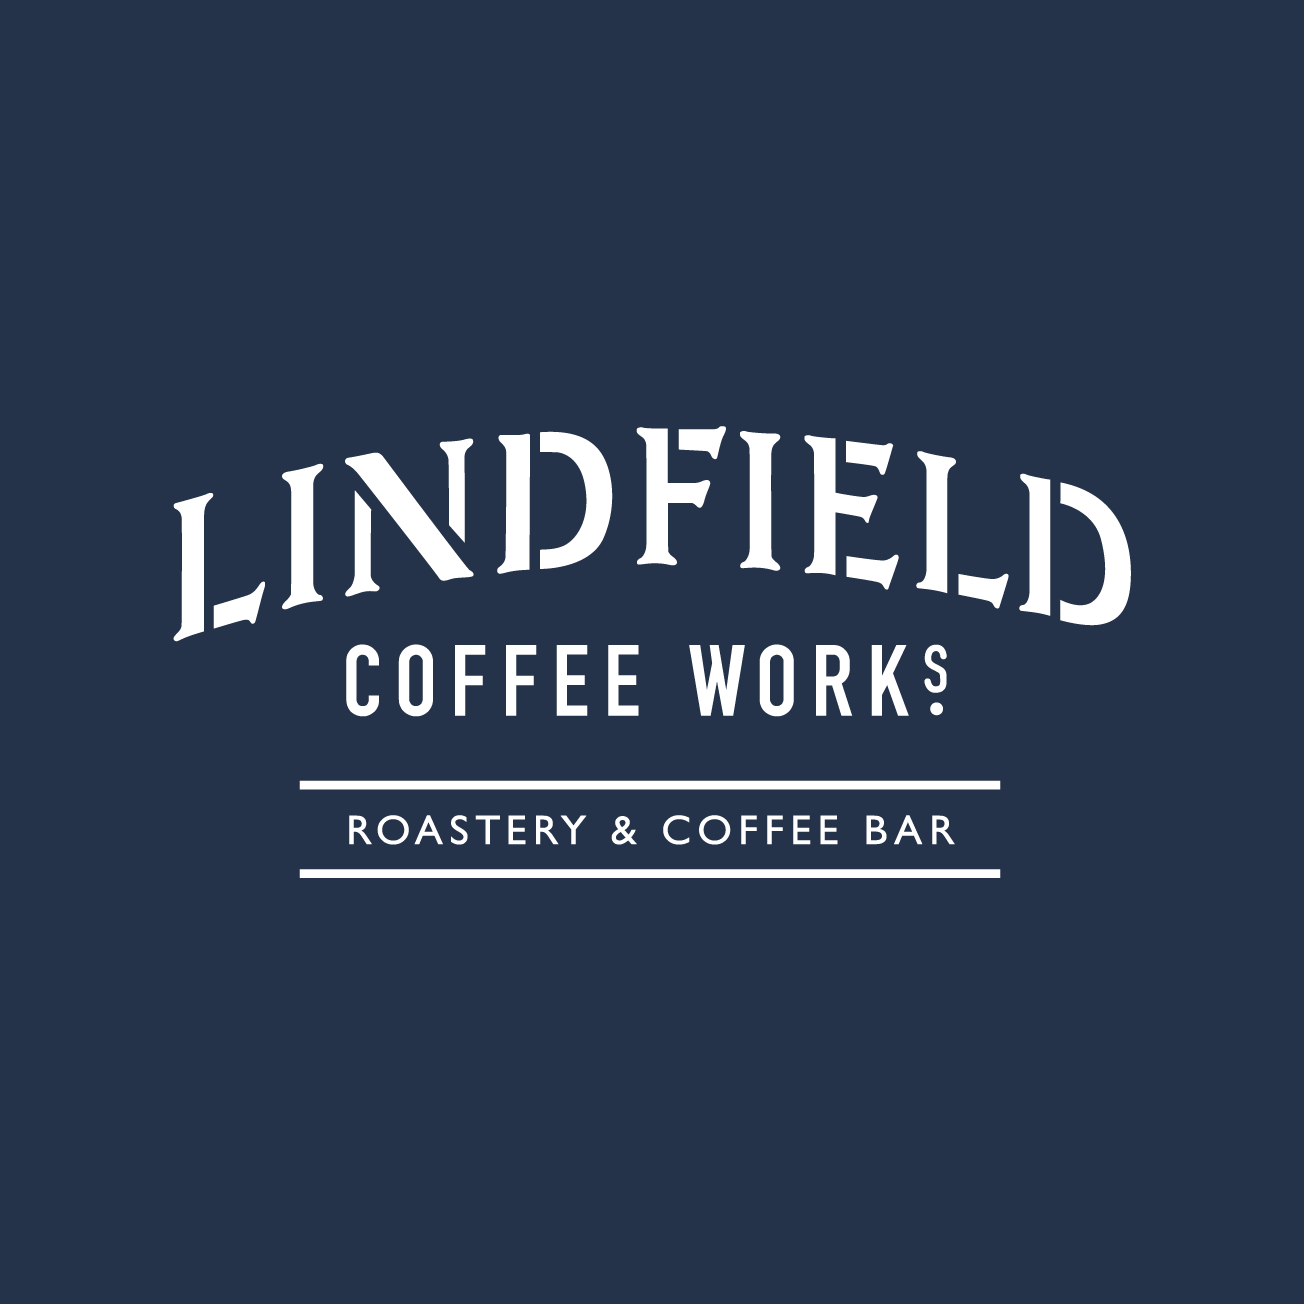 Club Image for LINDFIELD COFFEE WORKS